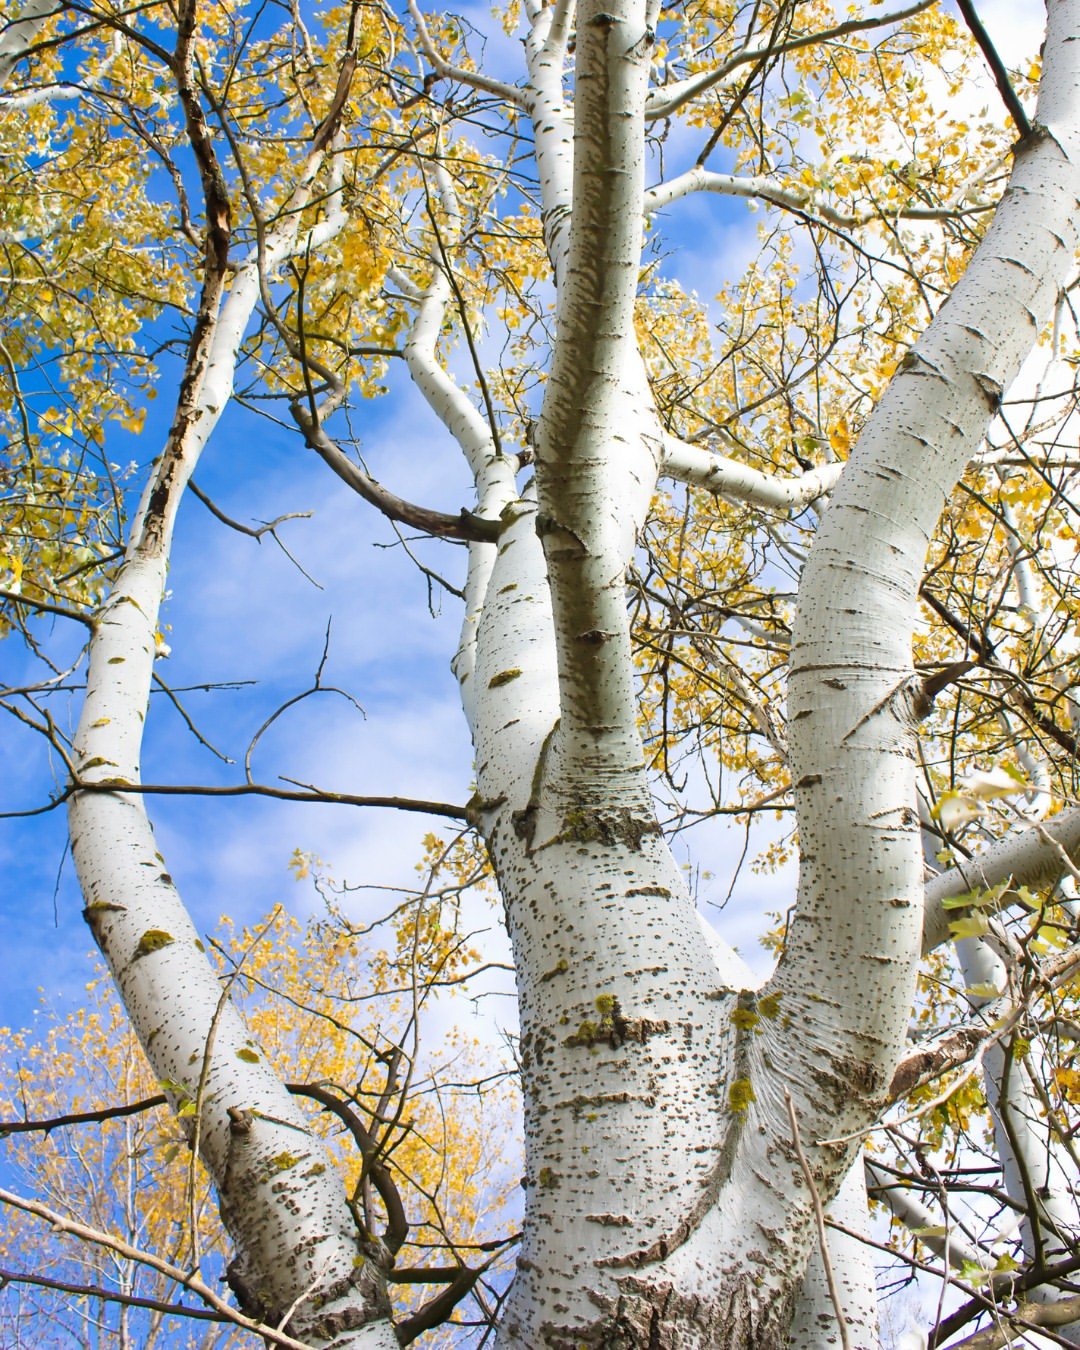 Silver birch: A tall, elegant tree with slender branches and delicate leaves, exuding a sense of grace and beauty.

